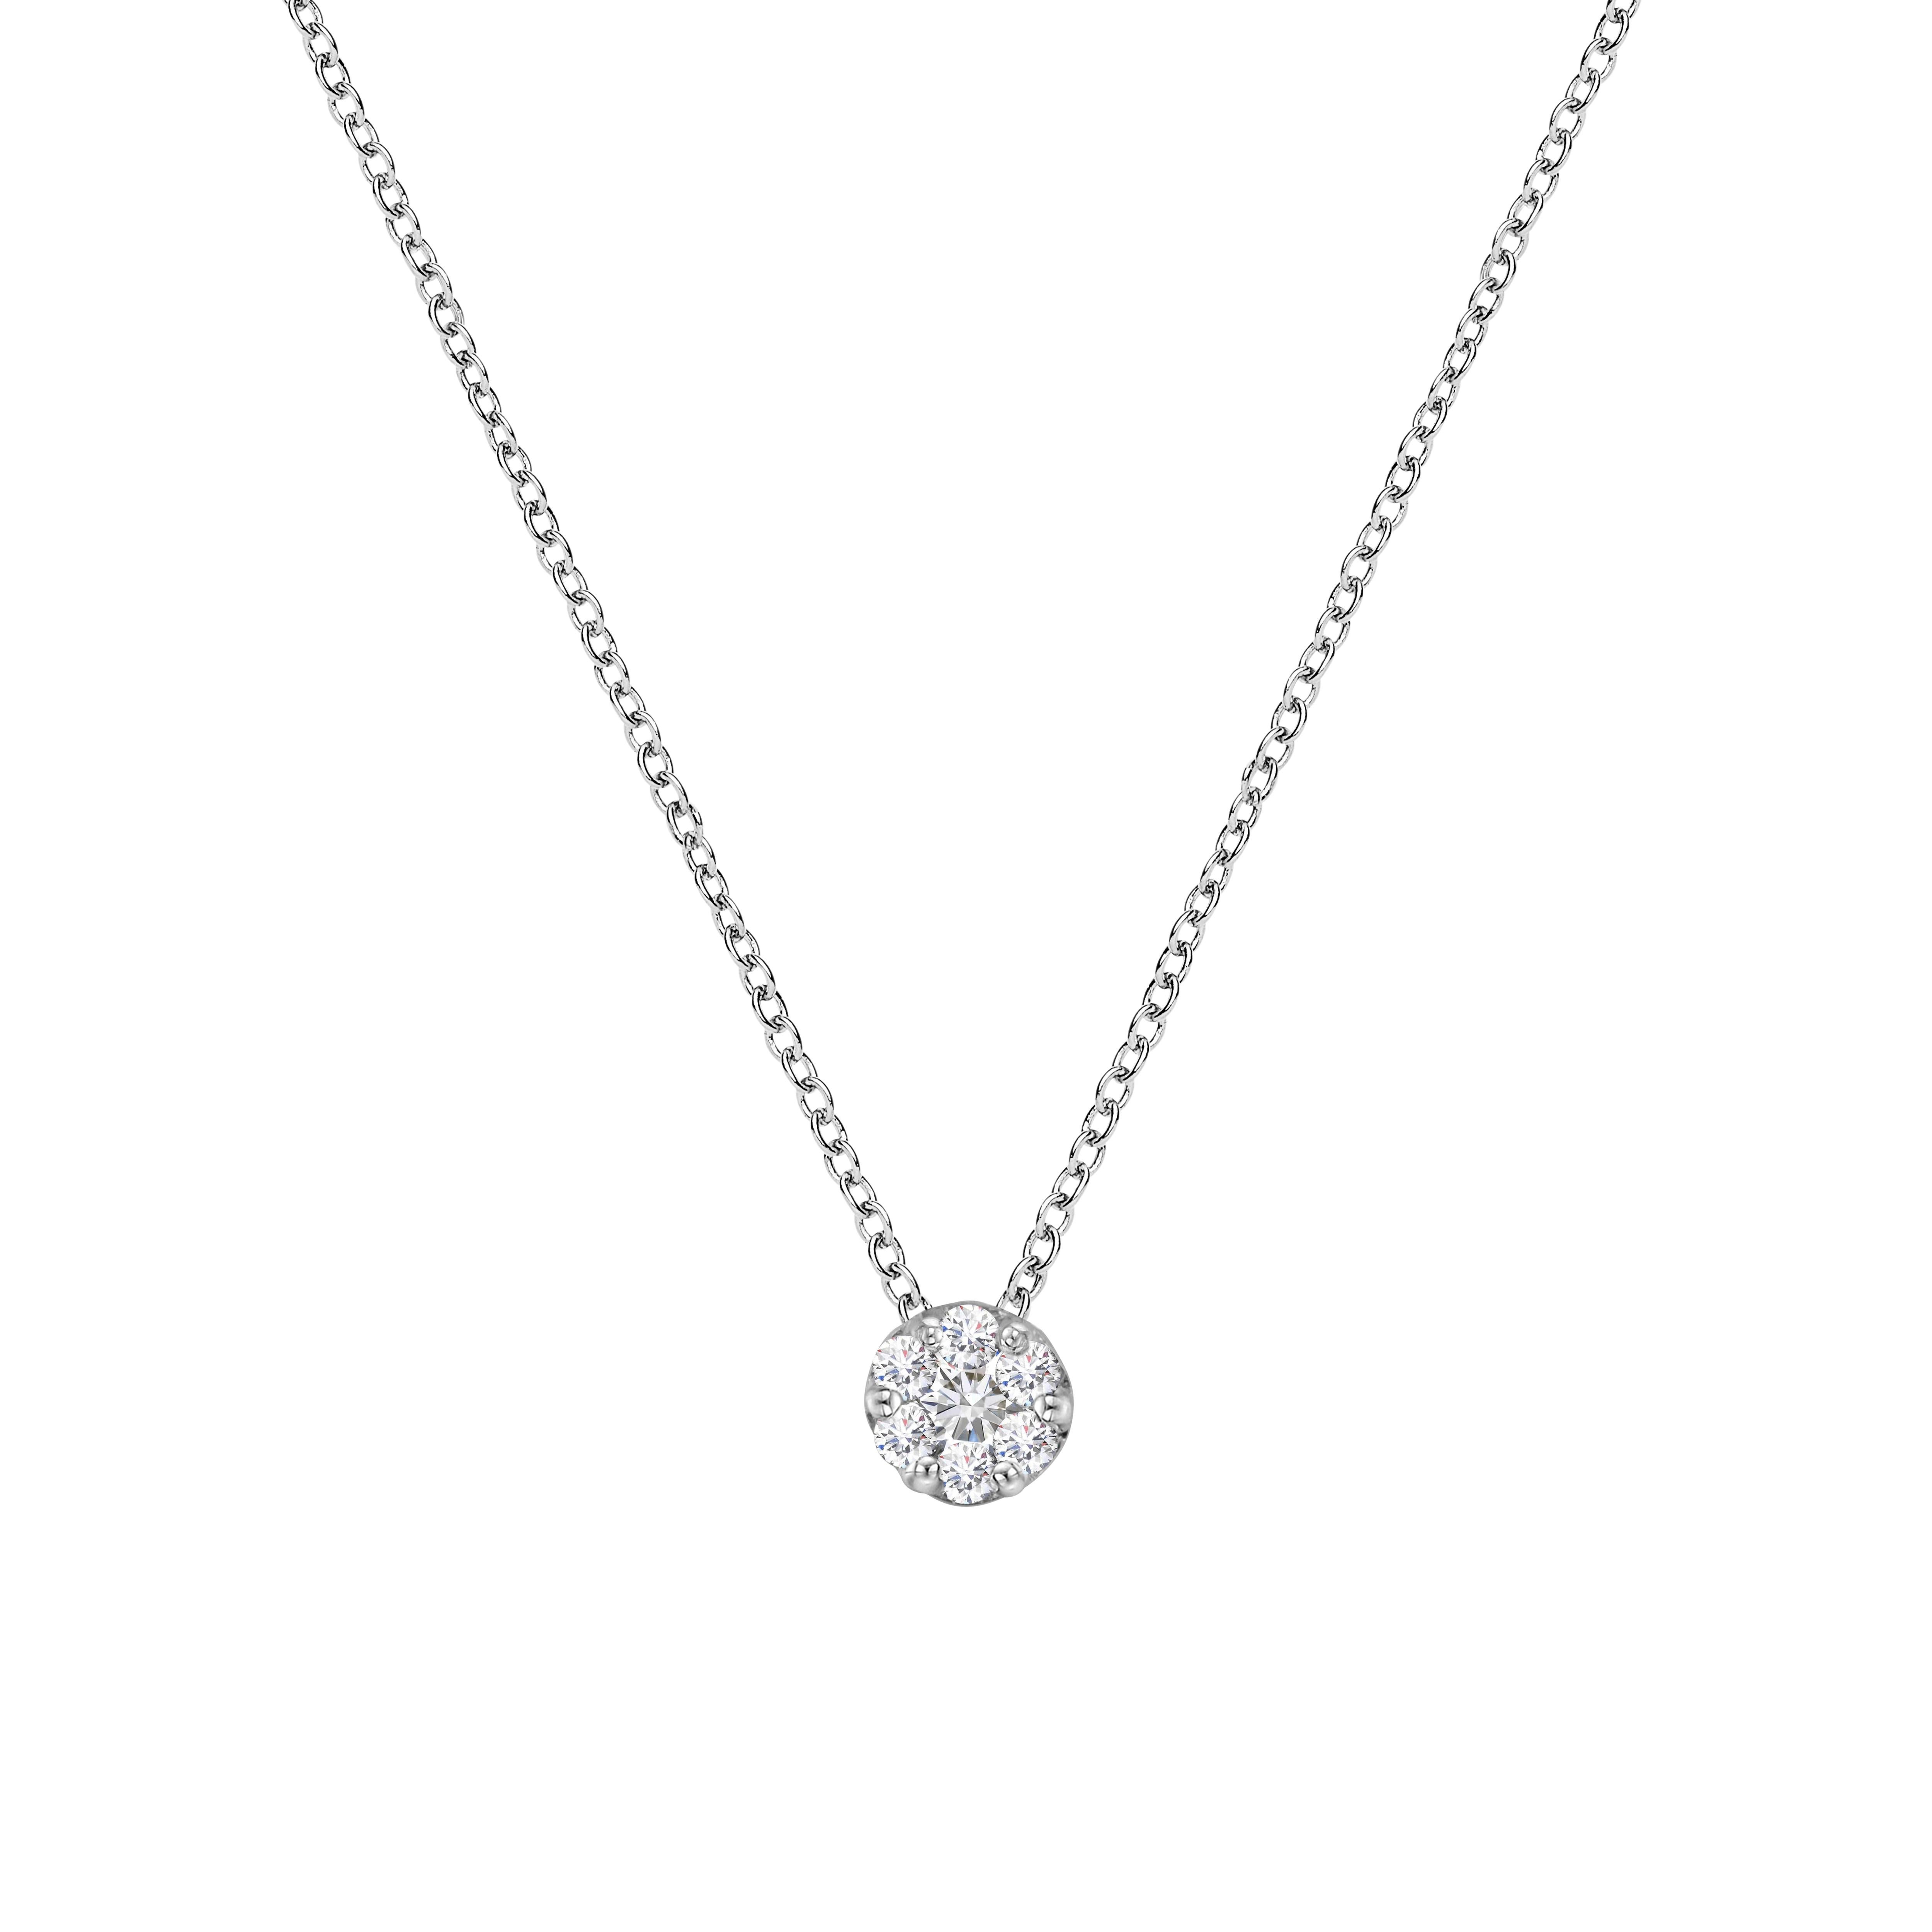 A simple rolo chain serves as the perfect backdrop to display this classic diamond cluster pendant. Made in 14k white gold, this design features 1/4ct TDW of round cut diamonds. The diamonds are arranged in a circular cluster that captures the light